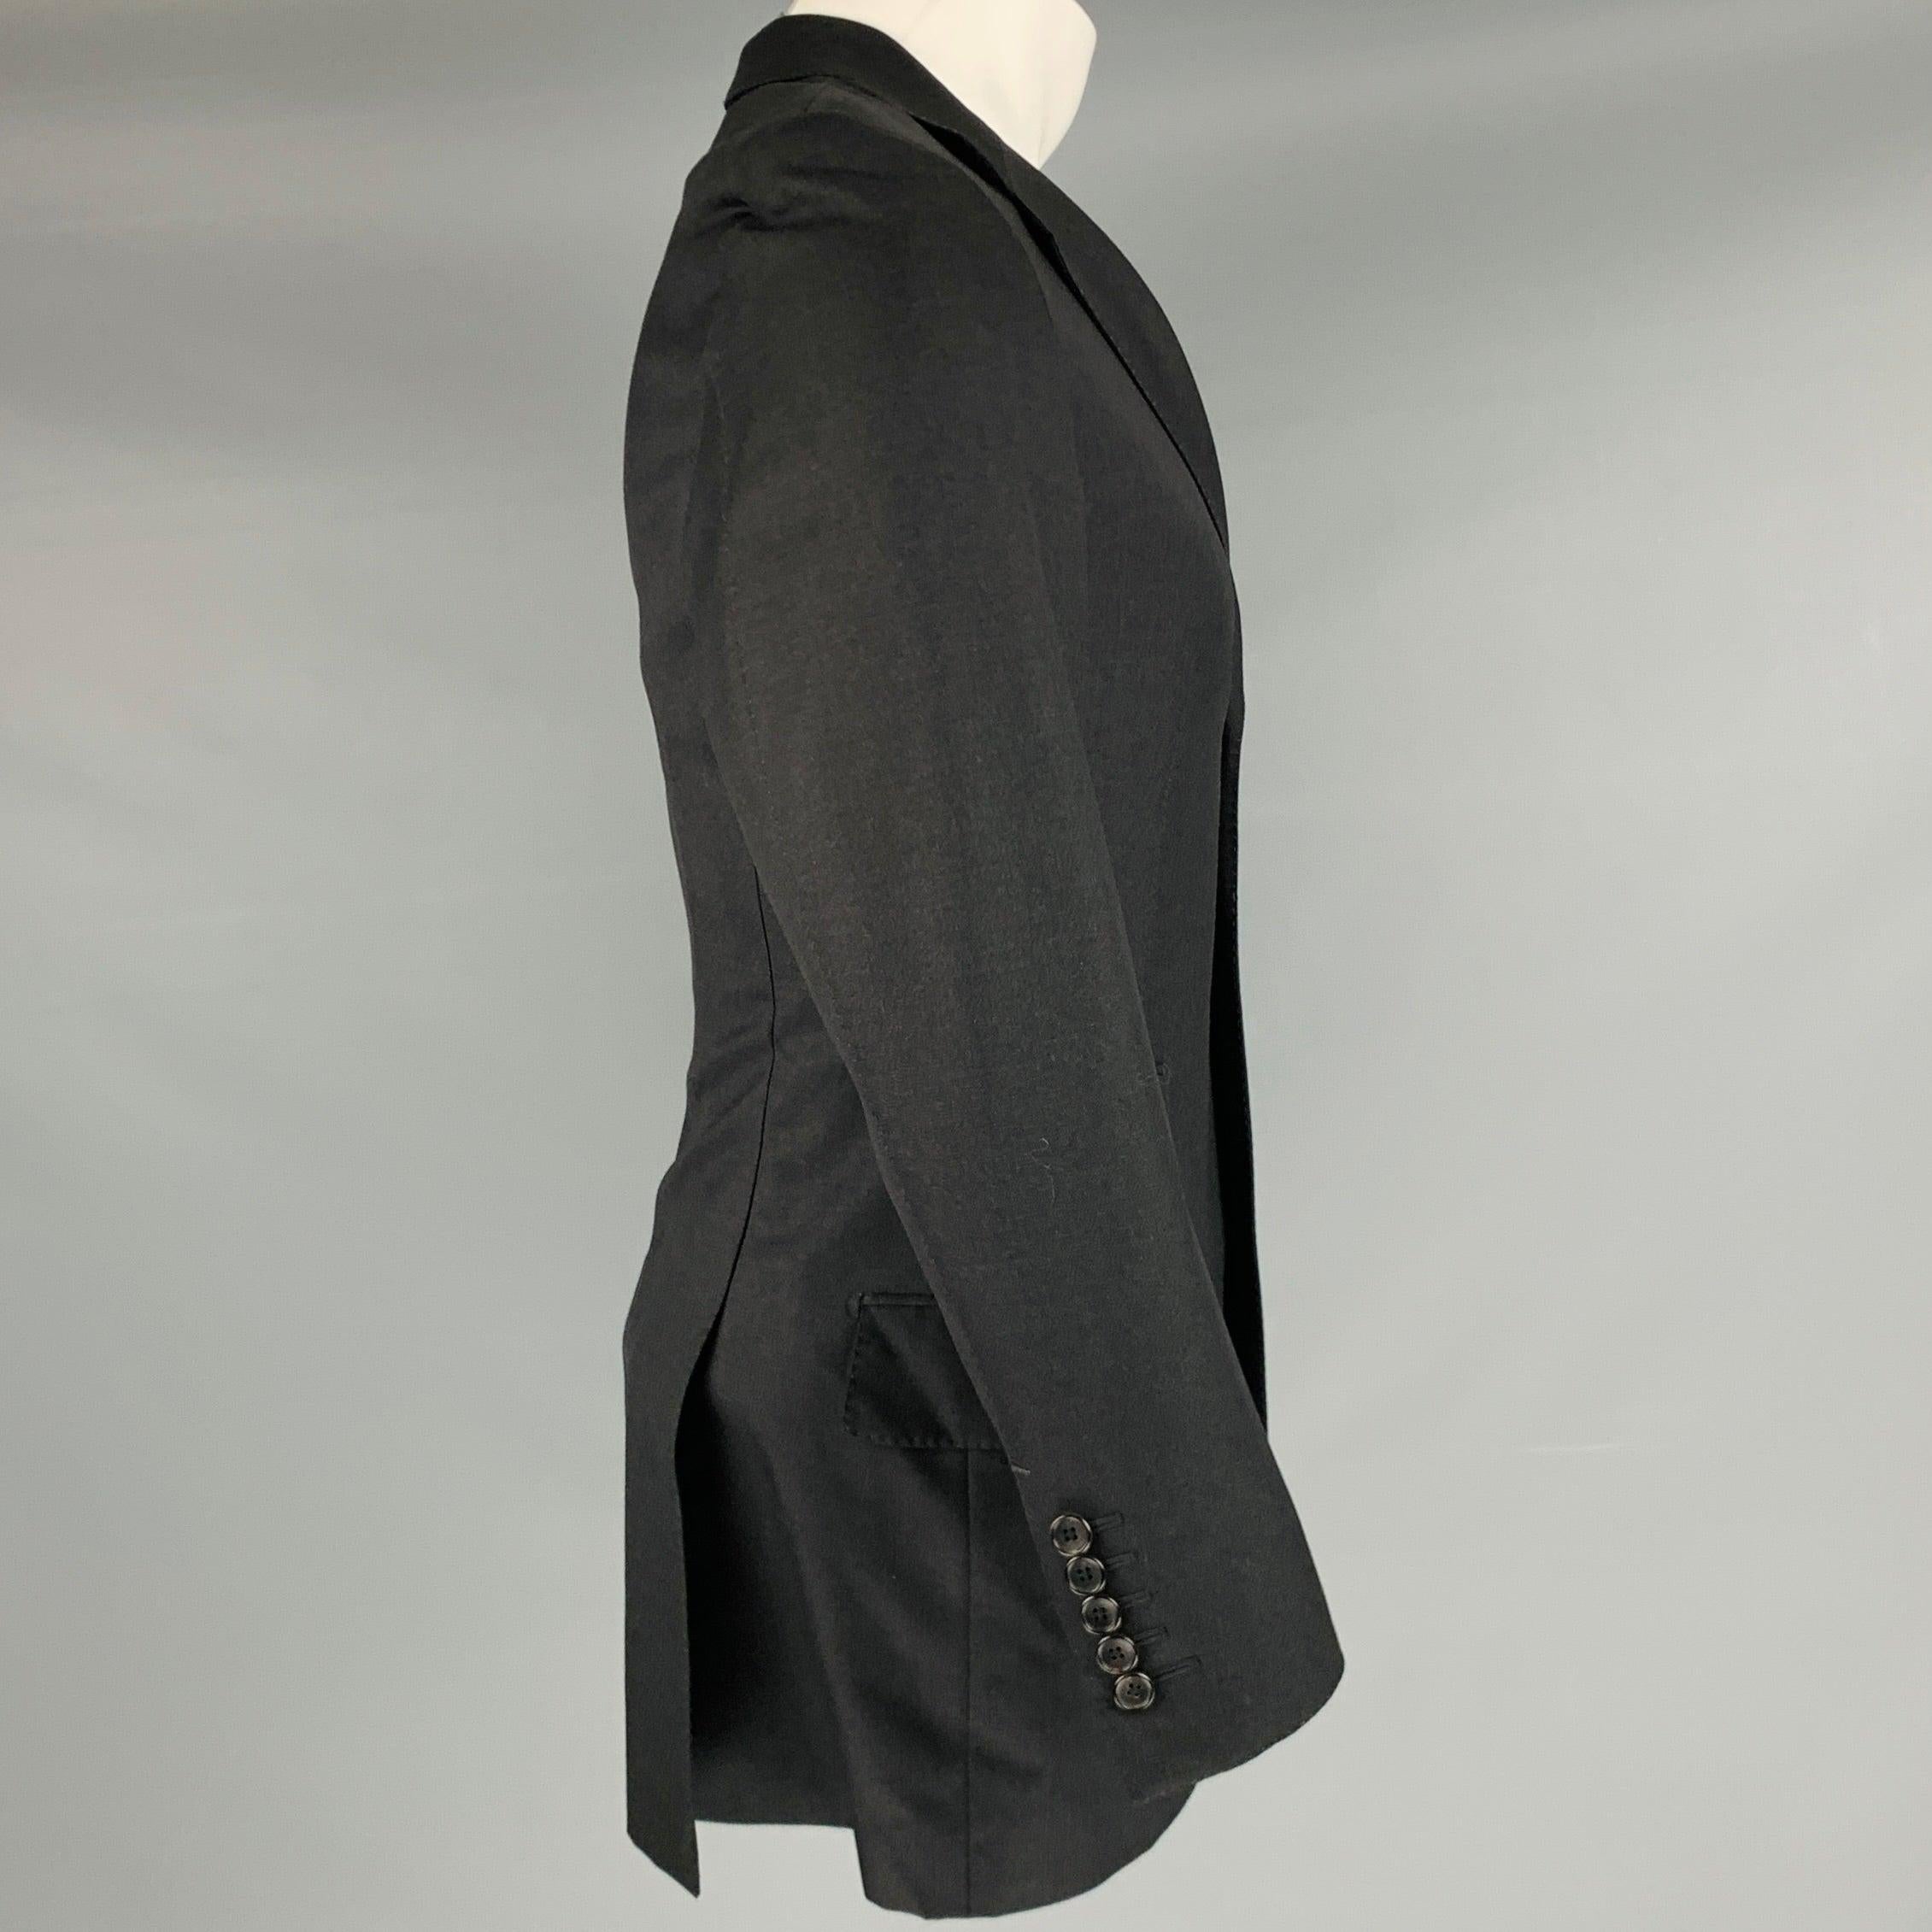 TOM FORD sport coat
in a
grey wool fabric featuring peak lapel, double vented back, and three button fold. Made in Italy.Very Good Pre-Owned Condition.
Minor signs of wear. 

Marked:   48R 

Measurements: 
 
Shoulder: 17 inches Chest: 38 inches